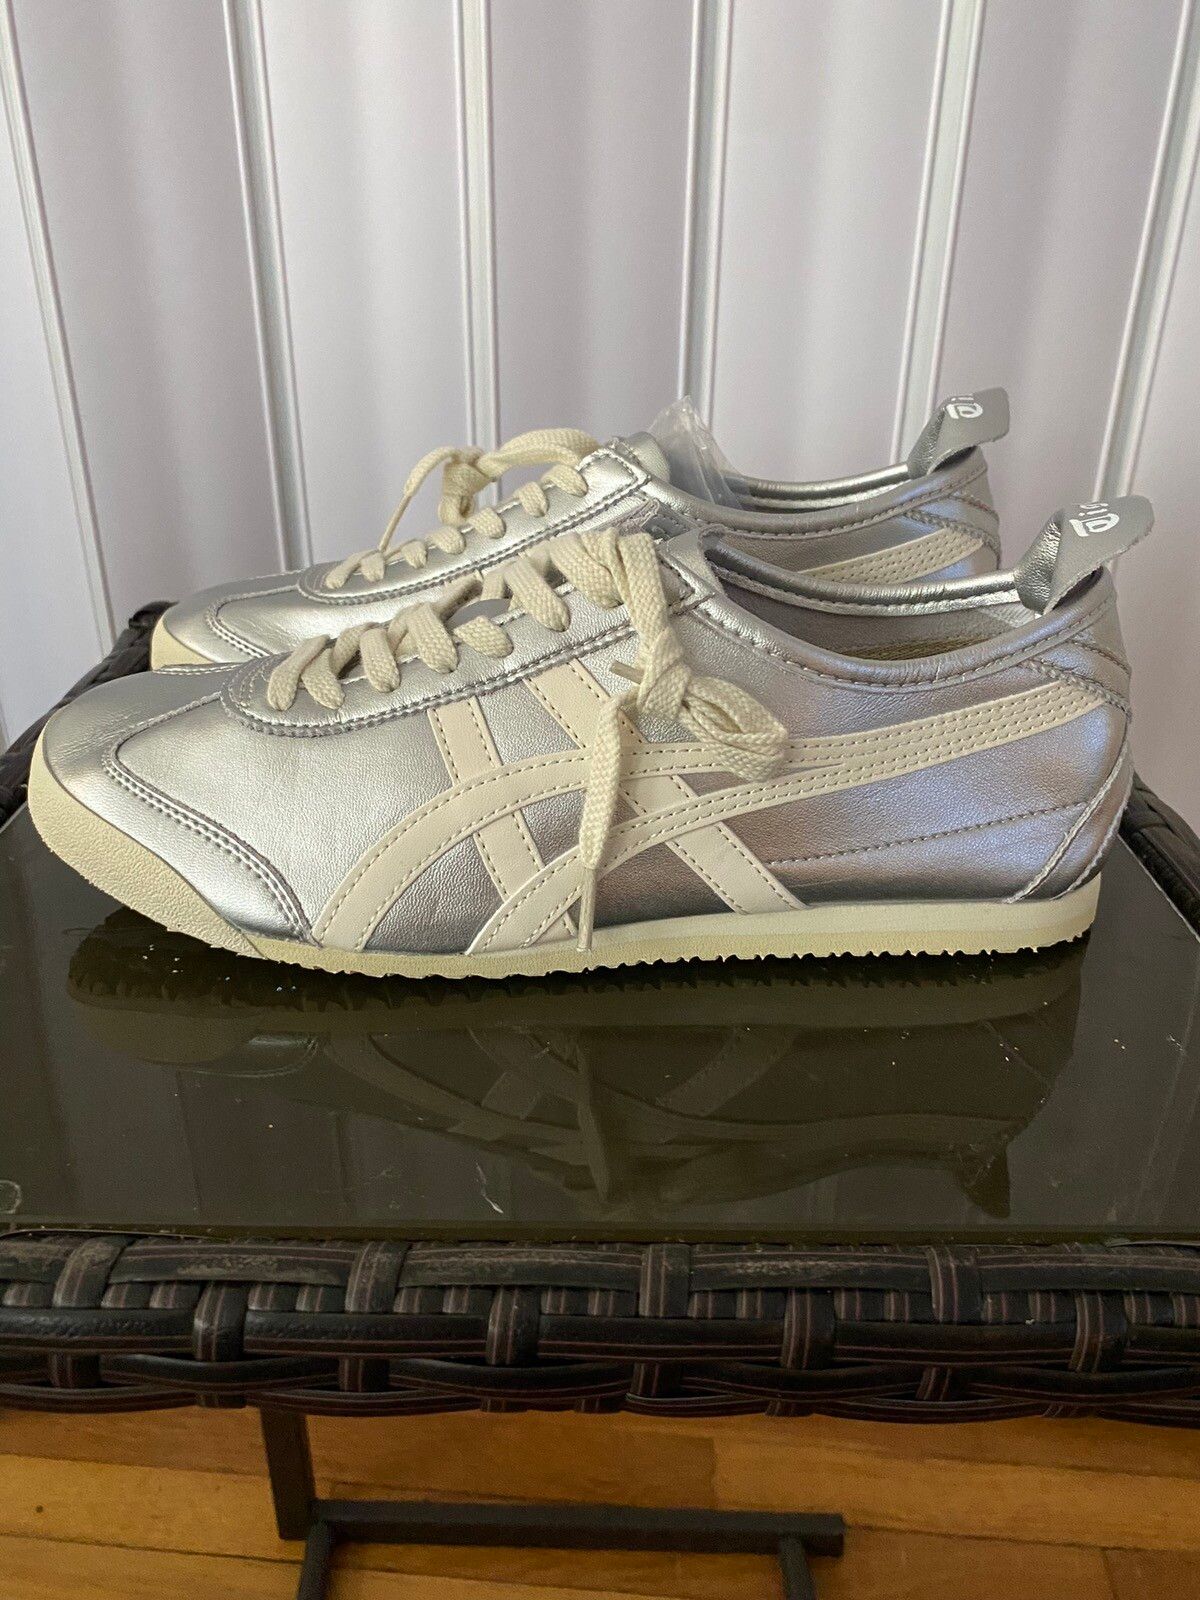 Onitsuka Tiger Asics Onisuka TIger Mexico 66 silver/off white | Grailed